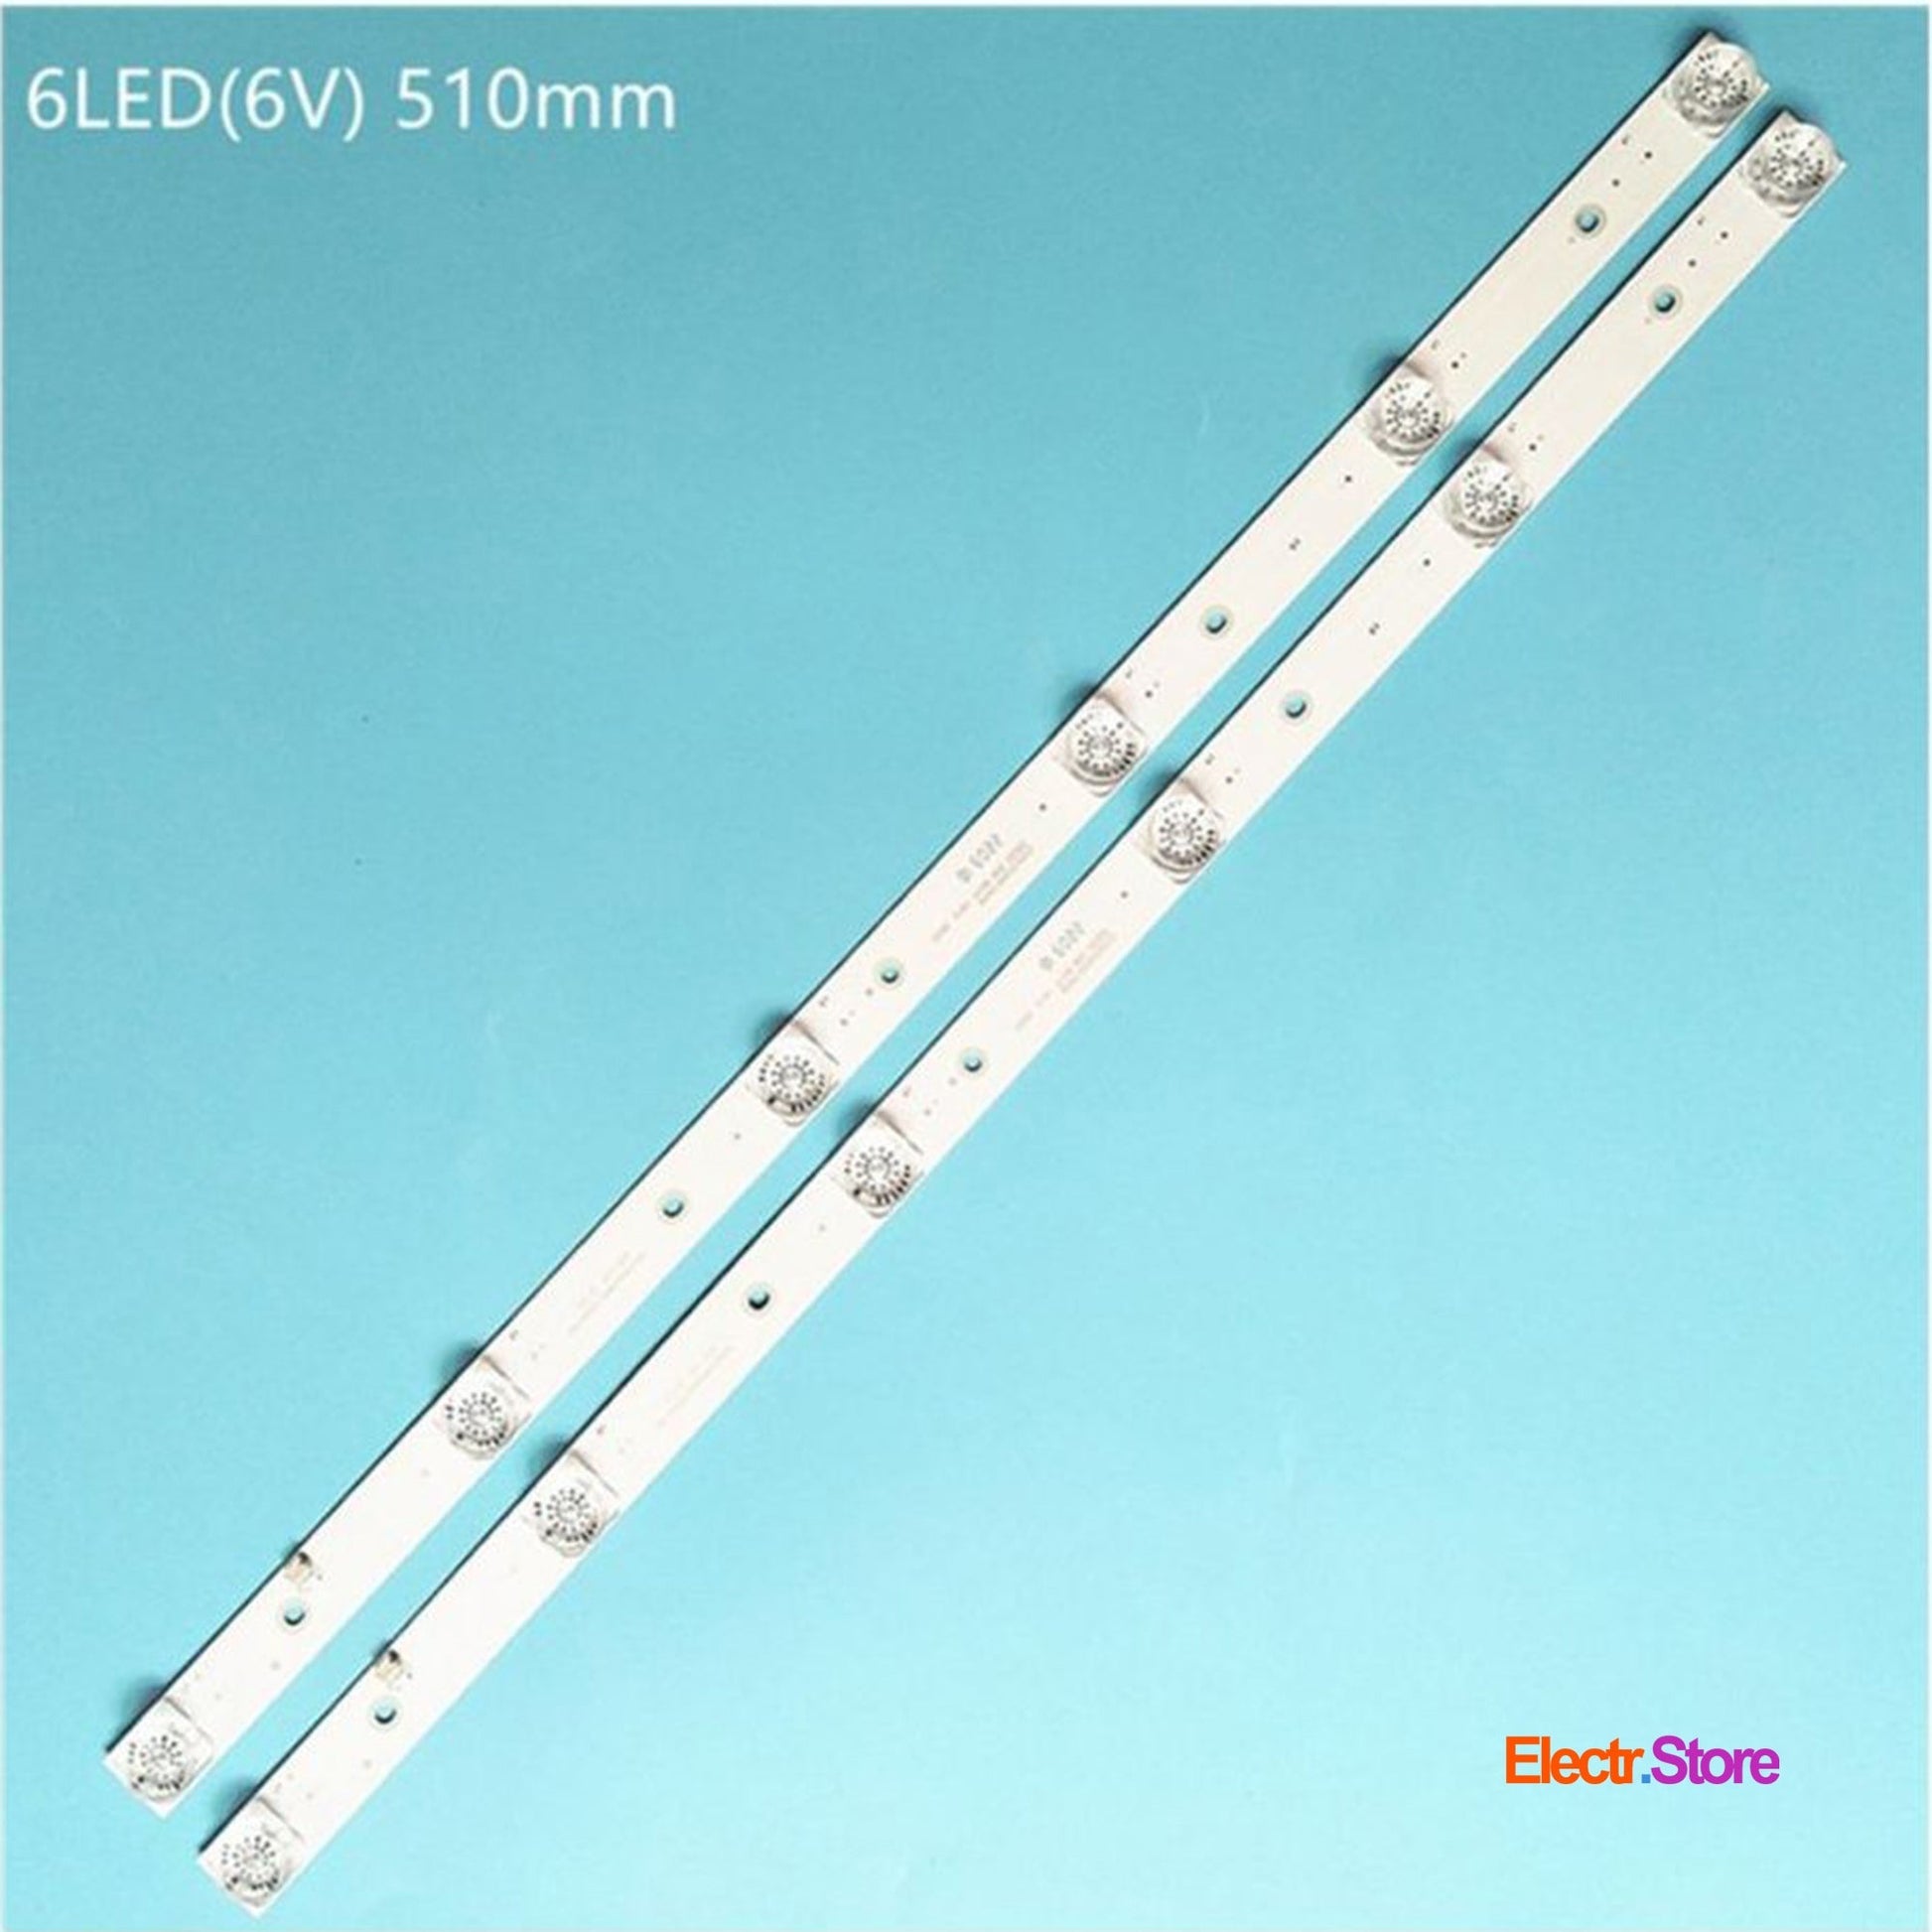 LED Backlight Strip Kits, CC02320D510V06 32E20 2x6 6S1P 1910 0D20, CC02320D510V09 32E20 2x6 6S1P 1410 0D20, MS-L2027 (2 pcs/kit), for TV 32" PANDA: 32D6S 32" CC02320D510V06 32e20 2x6 6s1p 1910 0d20 Dexp LED Backlights LEVEL Matrix Panda UNITED Electr.Store